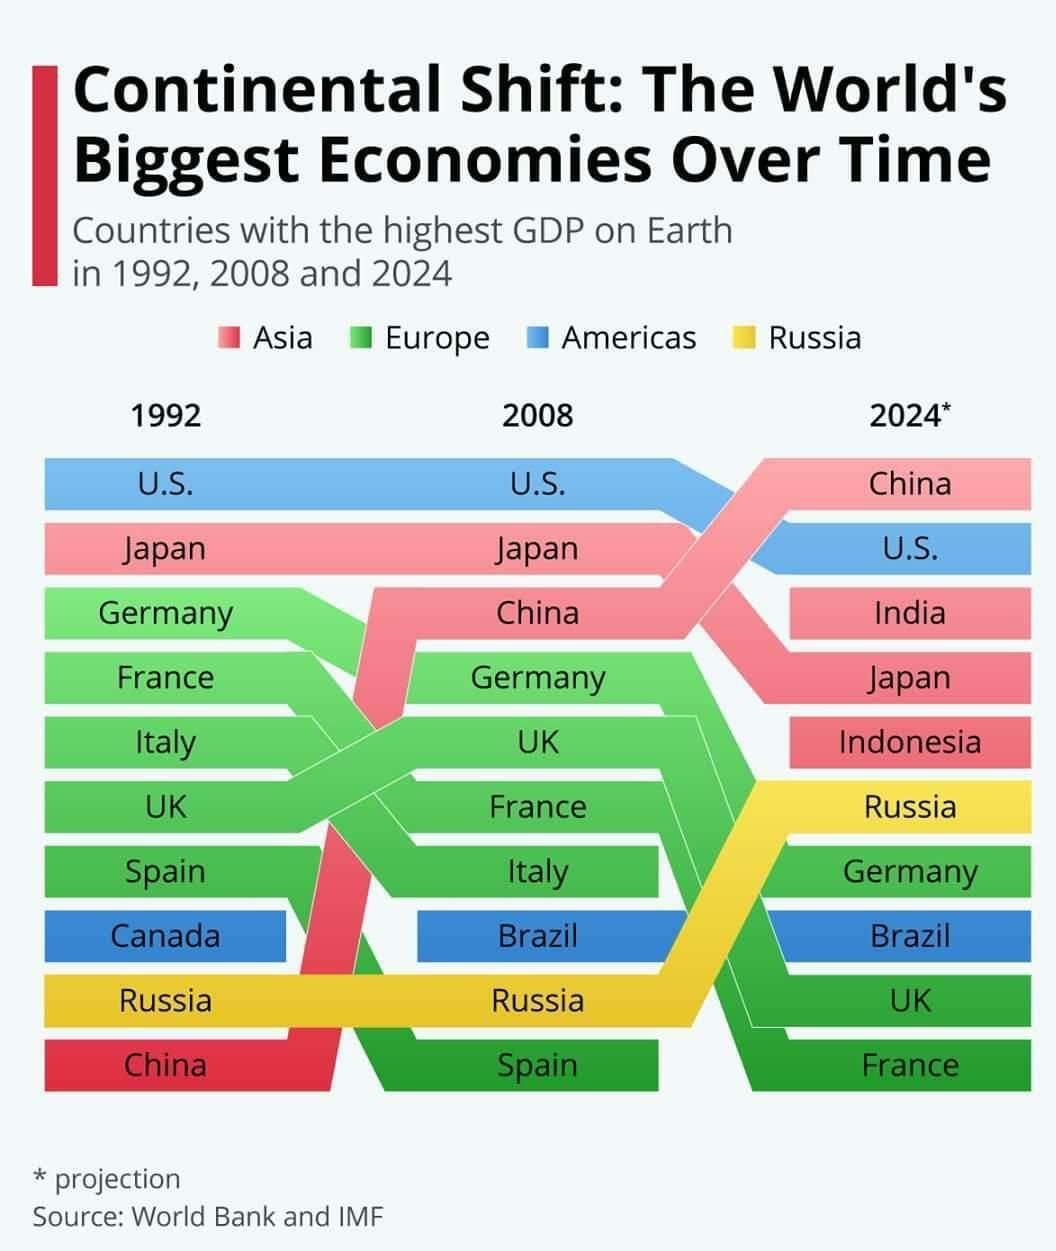 The world’s biggest economies over time